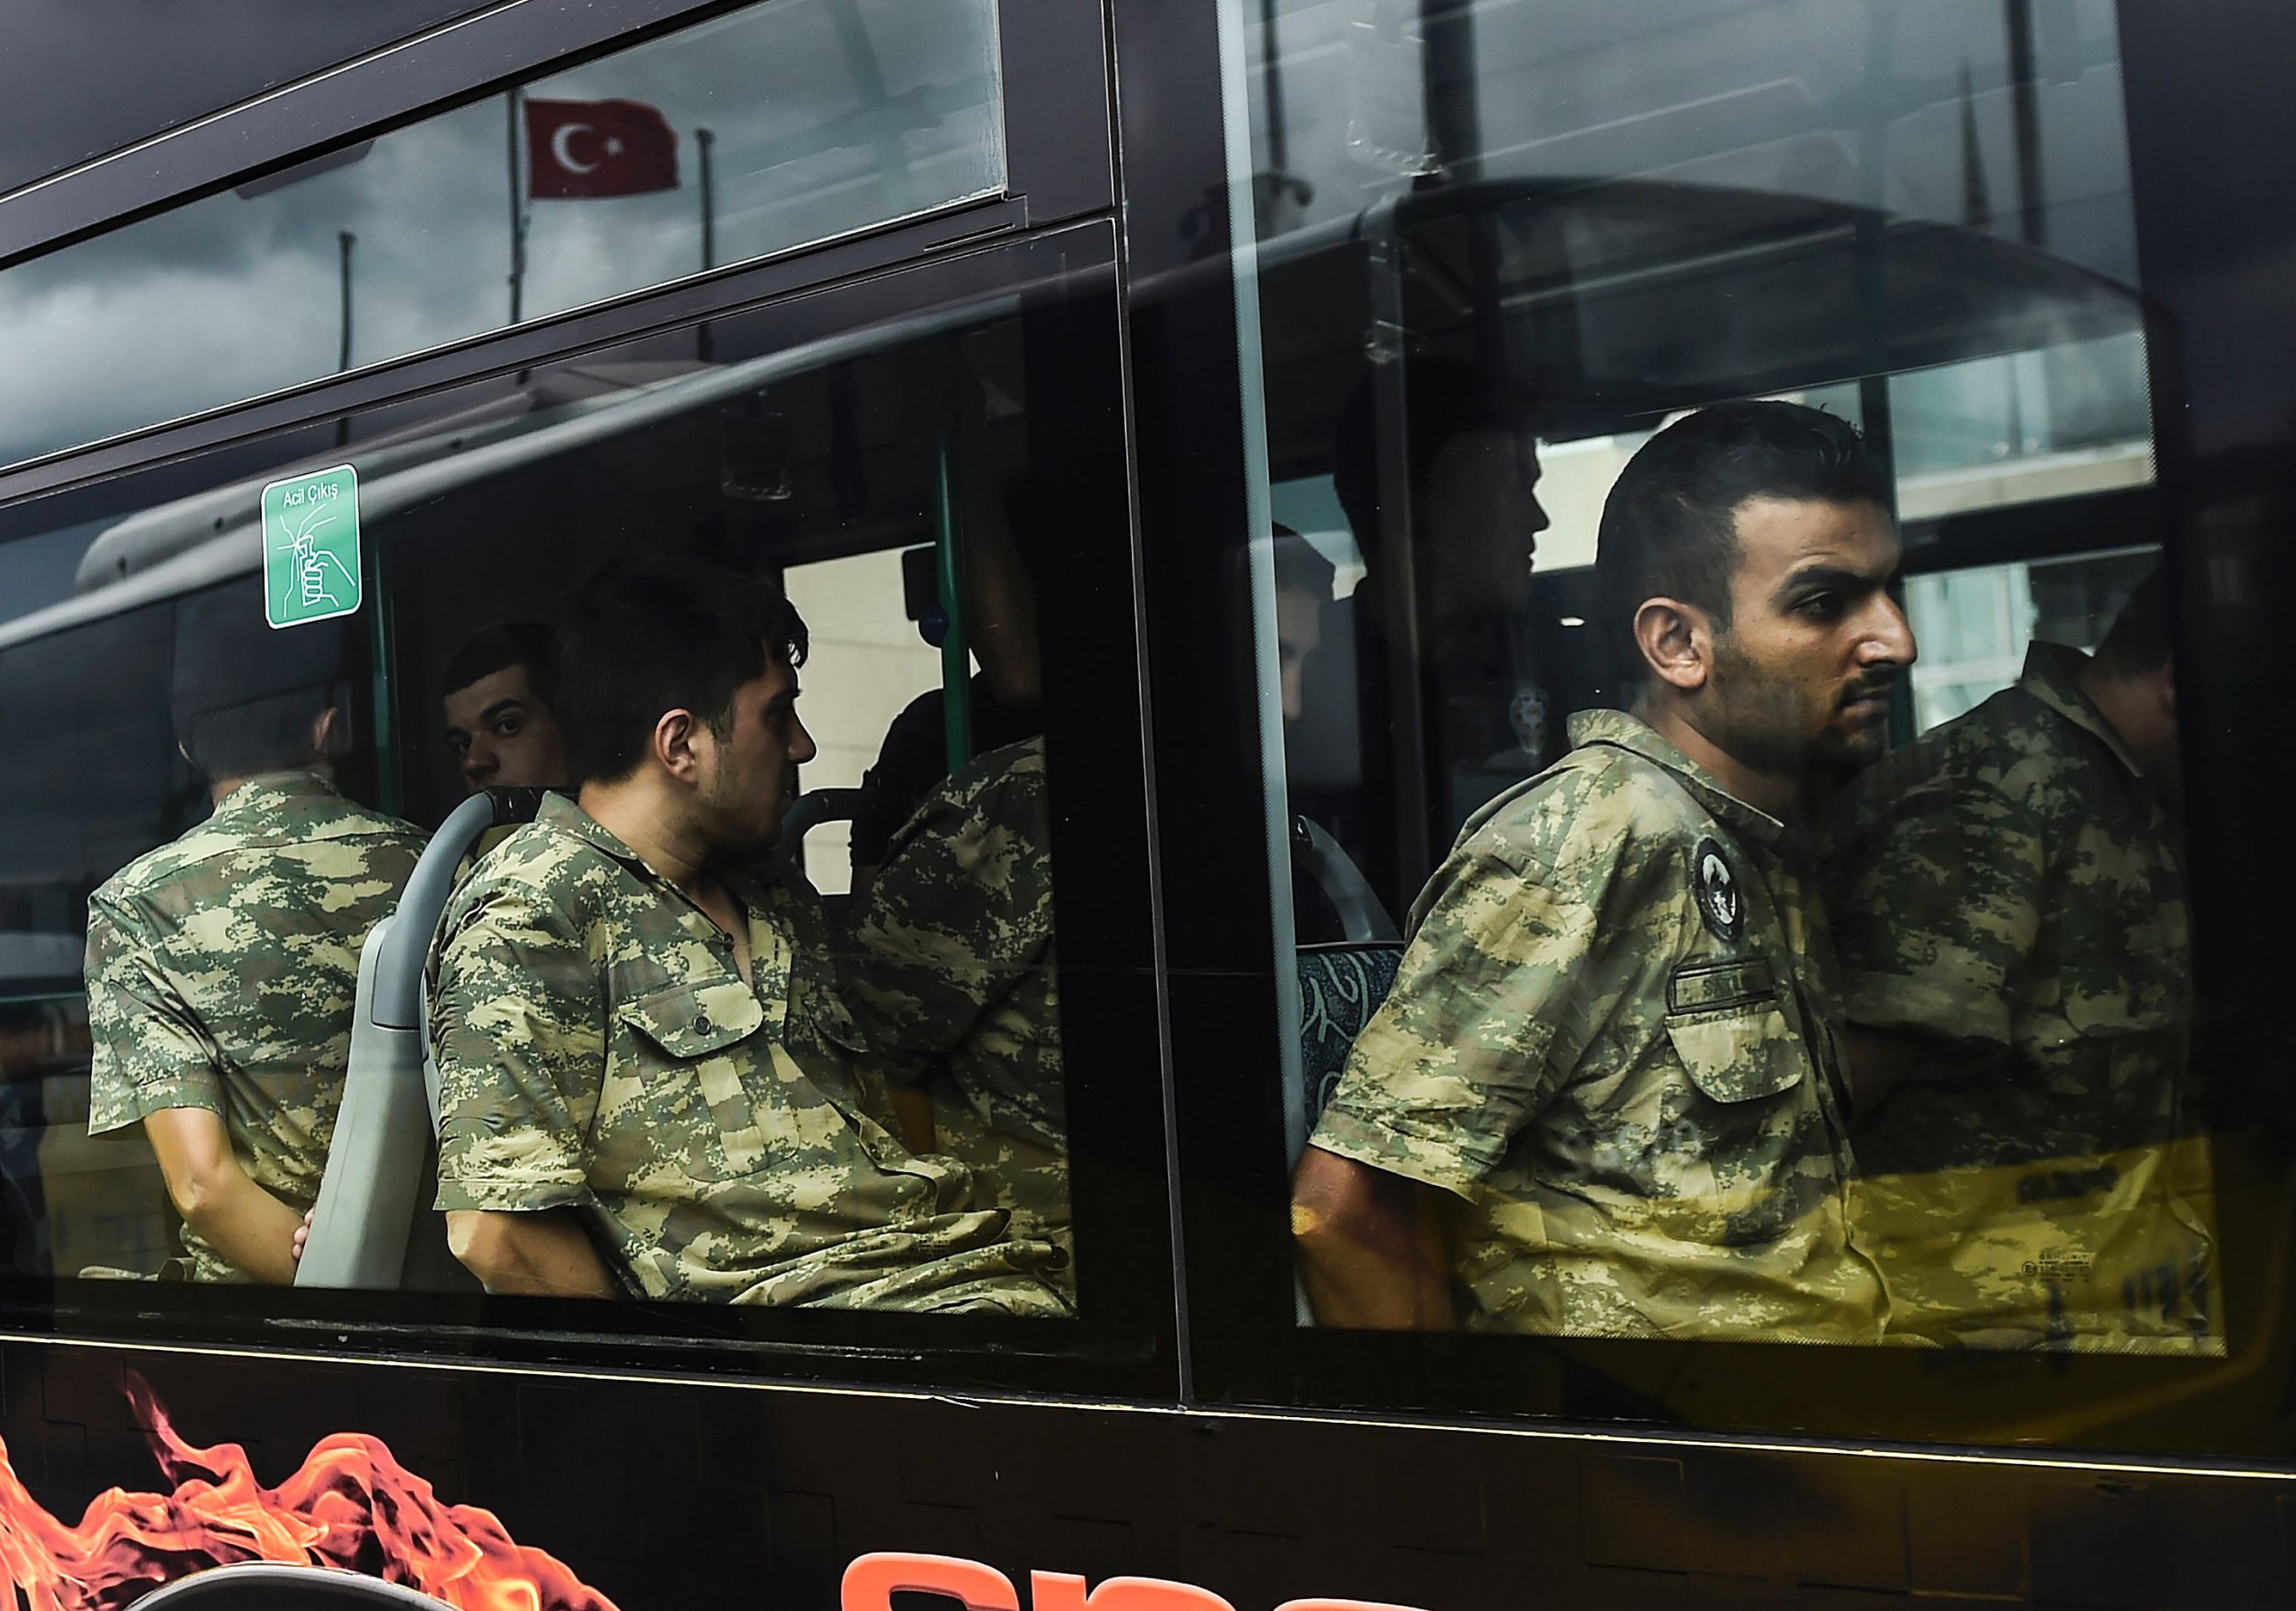 Turkey detained soldiers